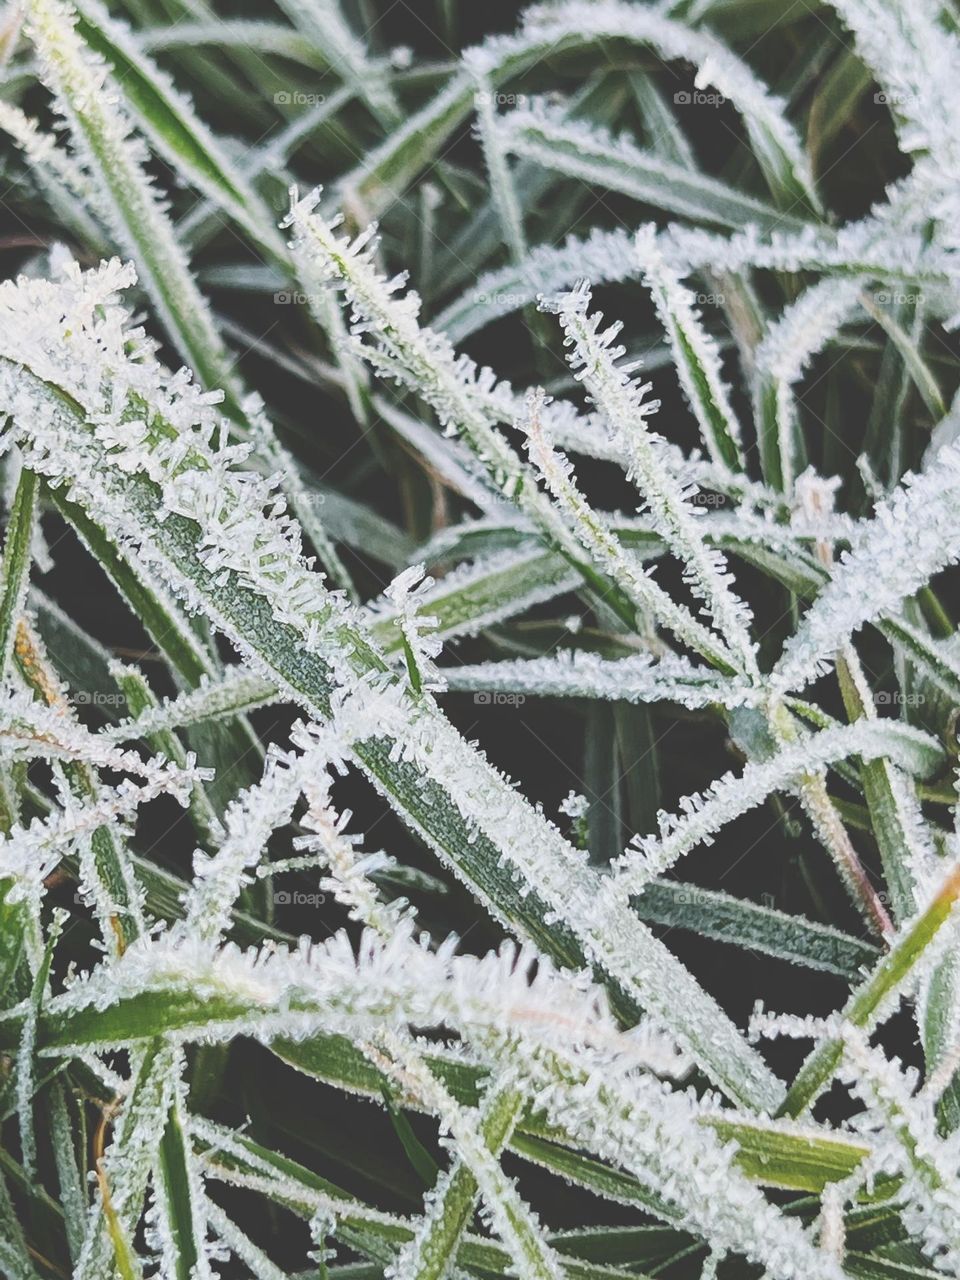 Frosted grass